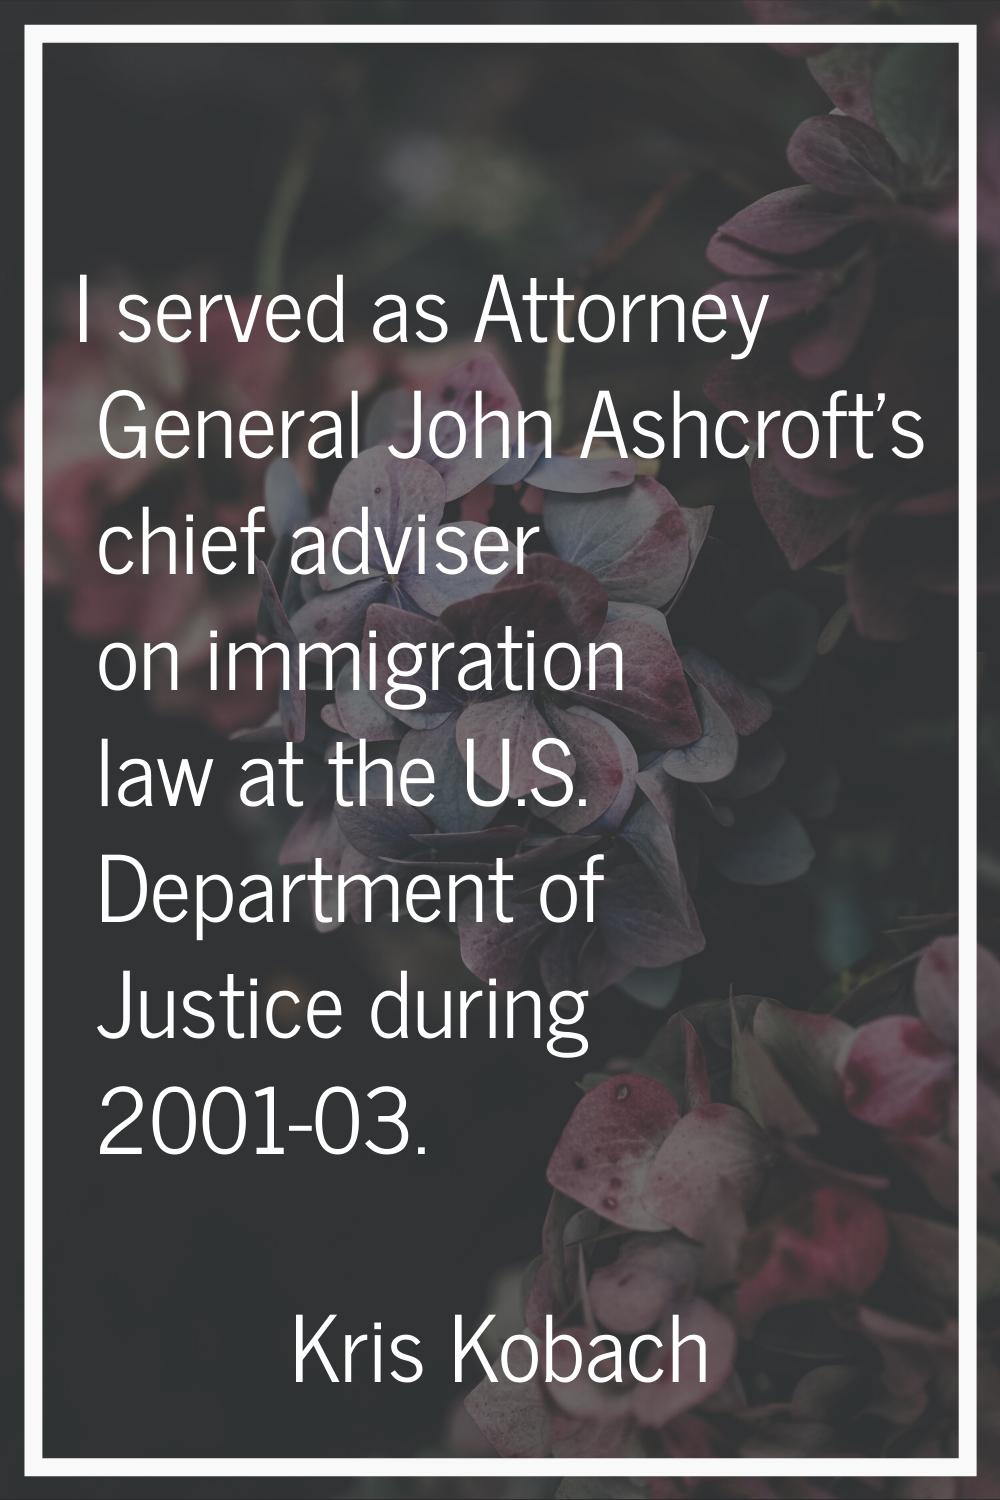 I served as Attorney General John Ashcroft's chief adviser on immigration law at the U.S. Departmen